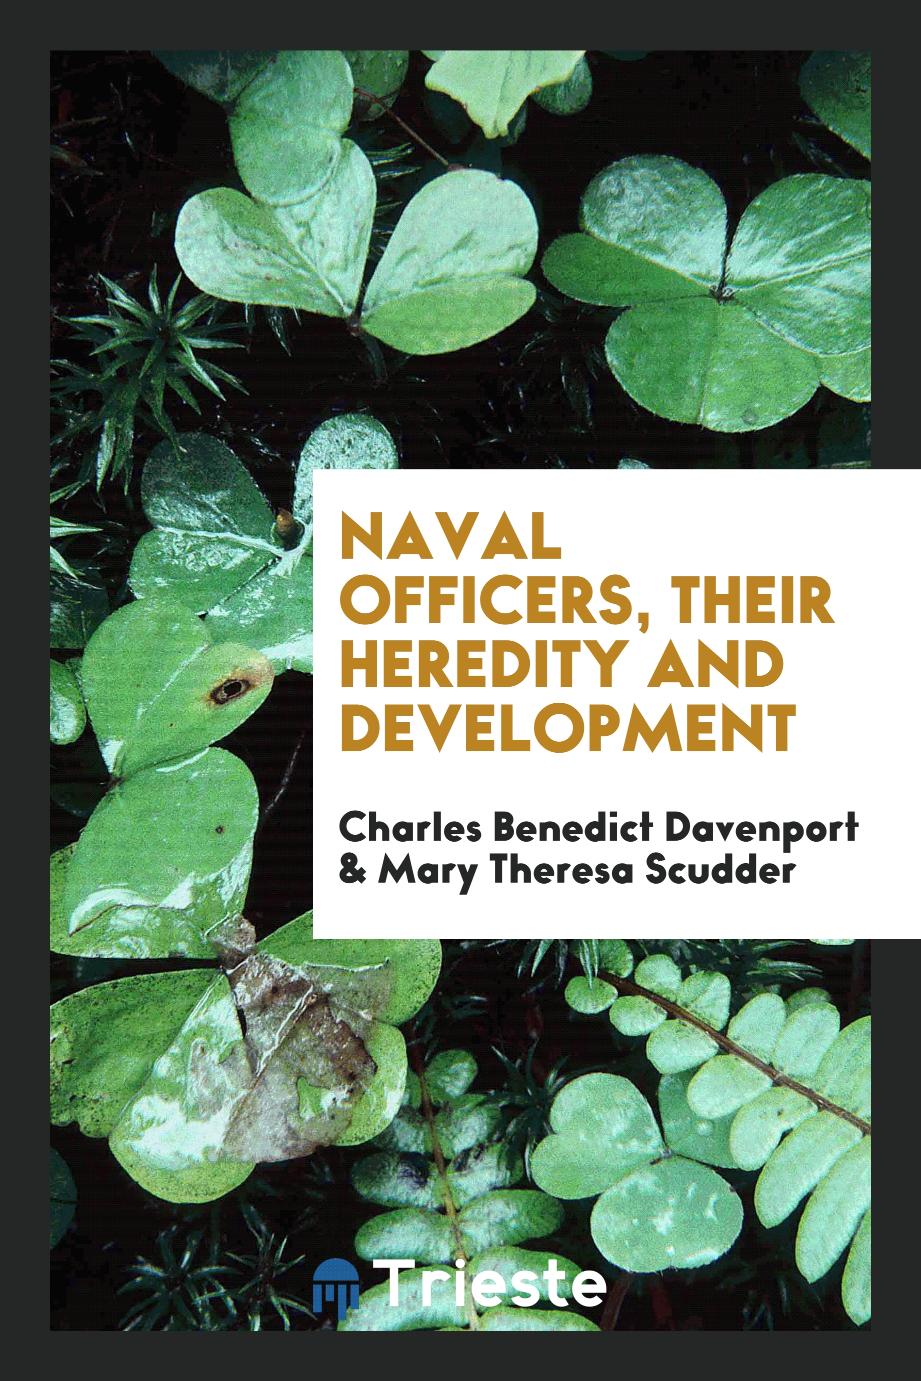 Naval officers, their heredity and development